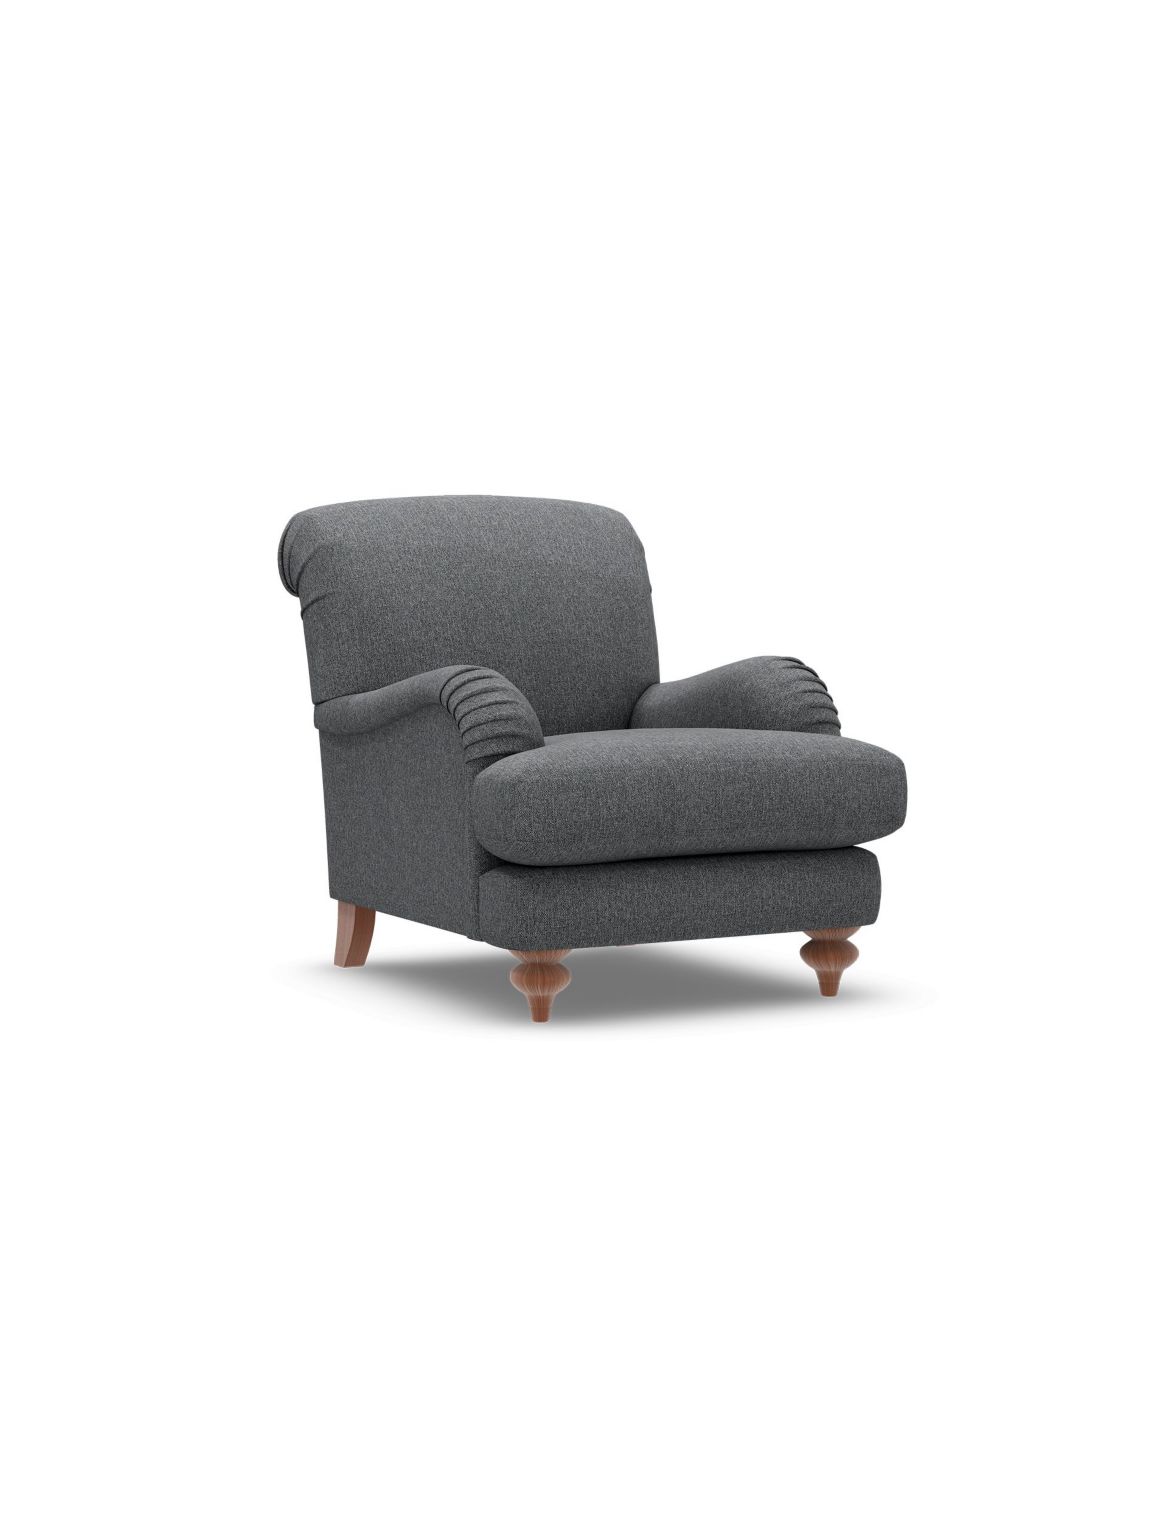 Isabelle Armchair grey